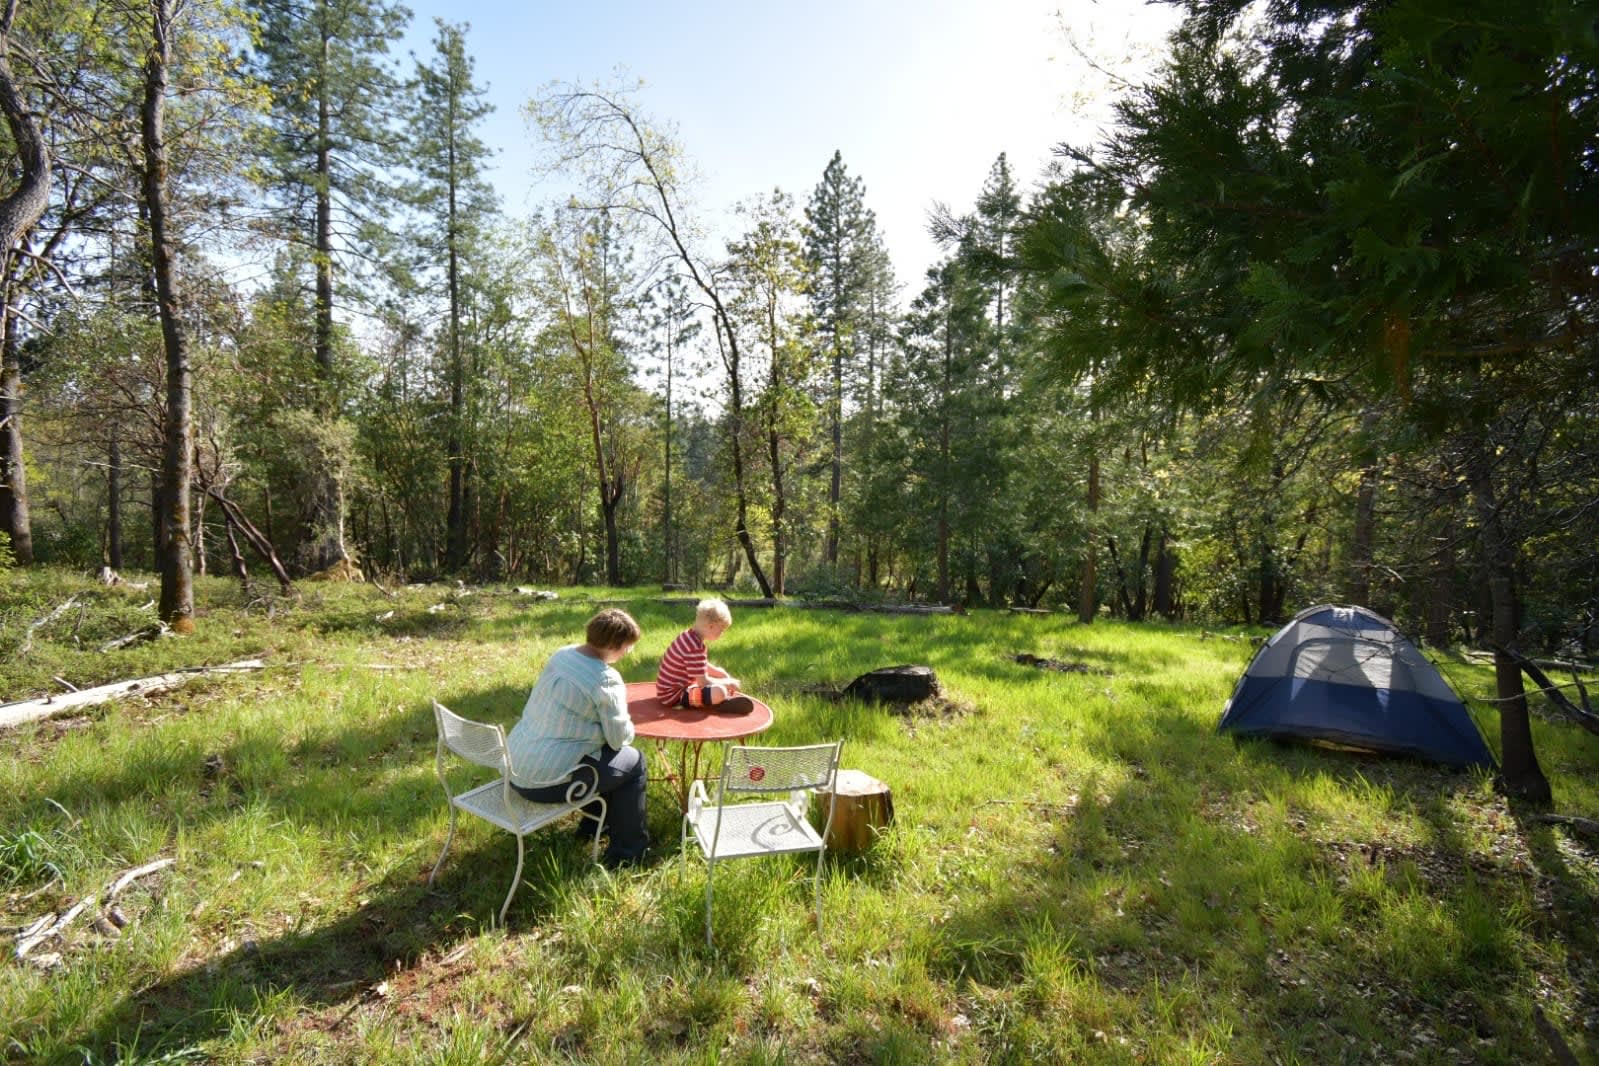 Large open meadow for running around and frisbee. Two tables are provided at the site. Mountain biking, trails and easy access to the Yuba and Gold Rush towns. 